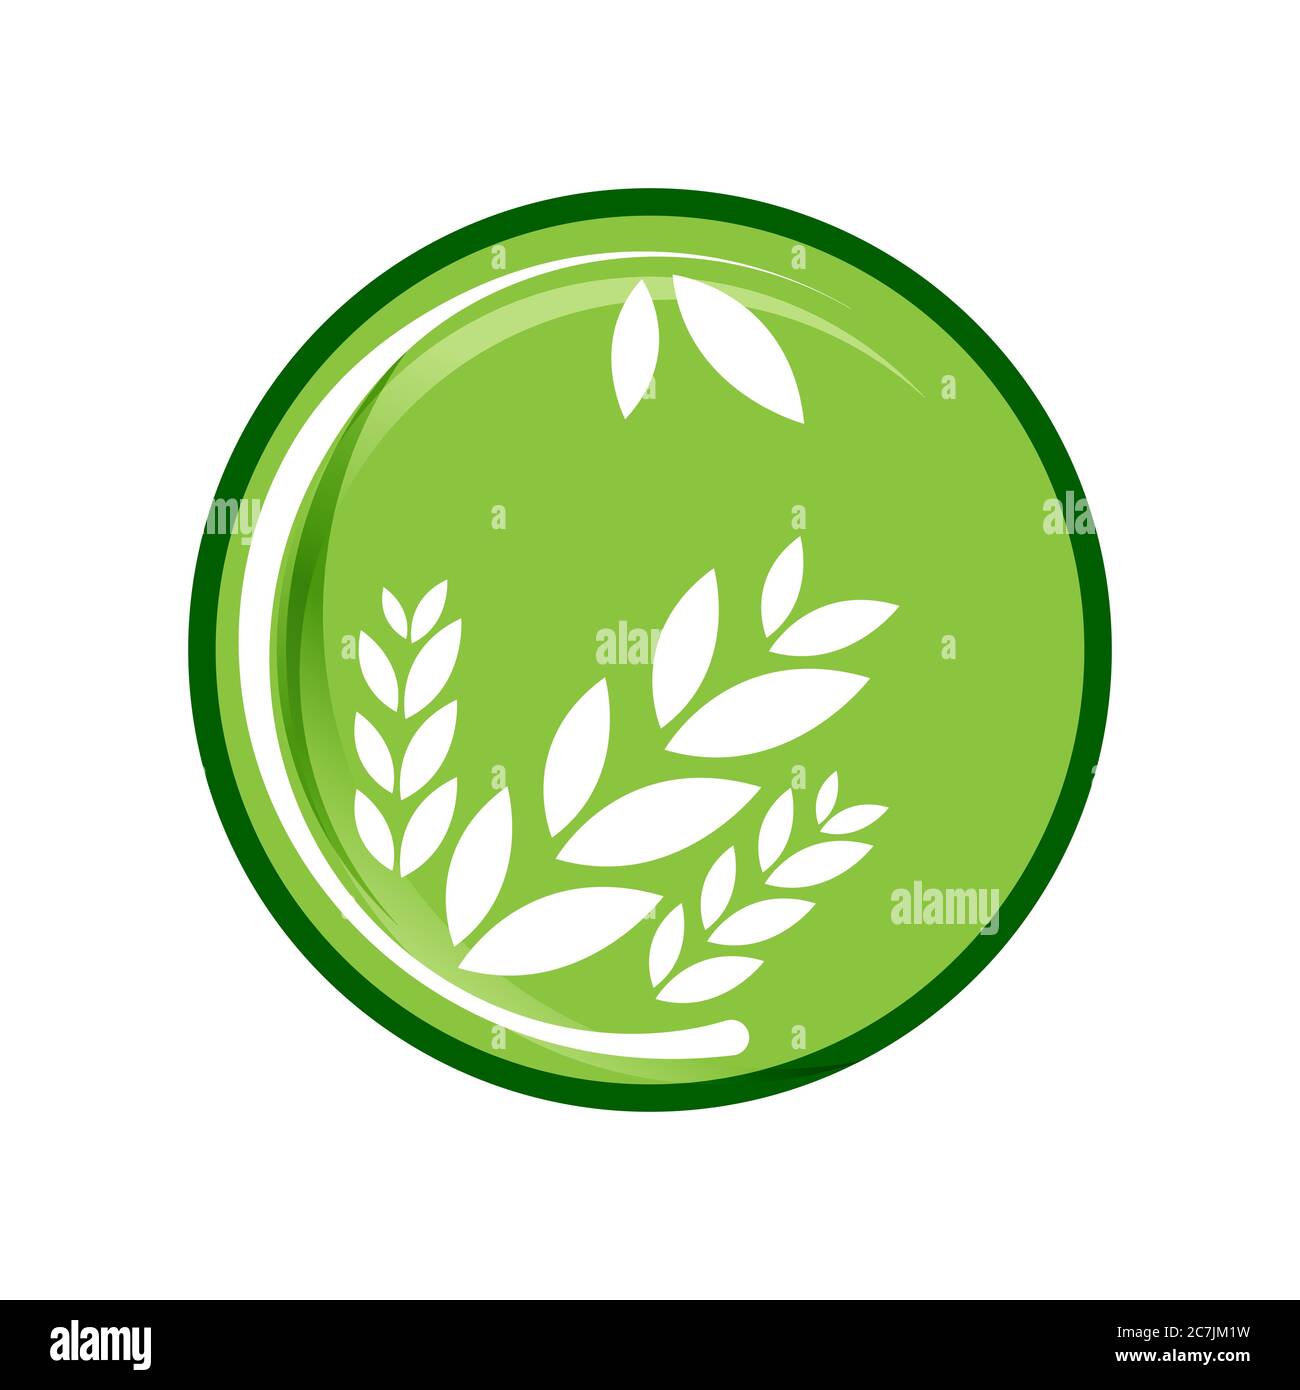 simple and modern green leaf logo on the circle shape vector elemen Stock Vector